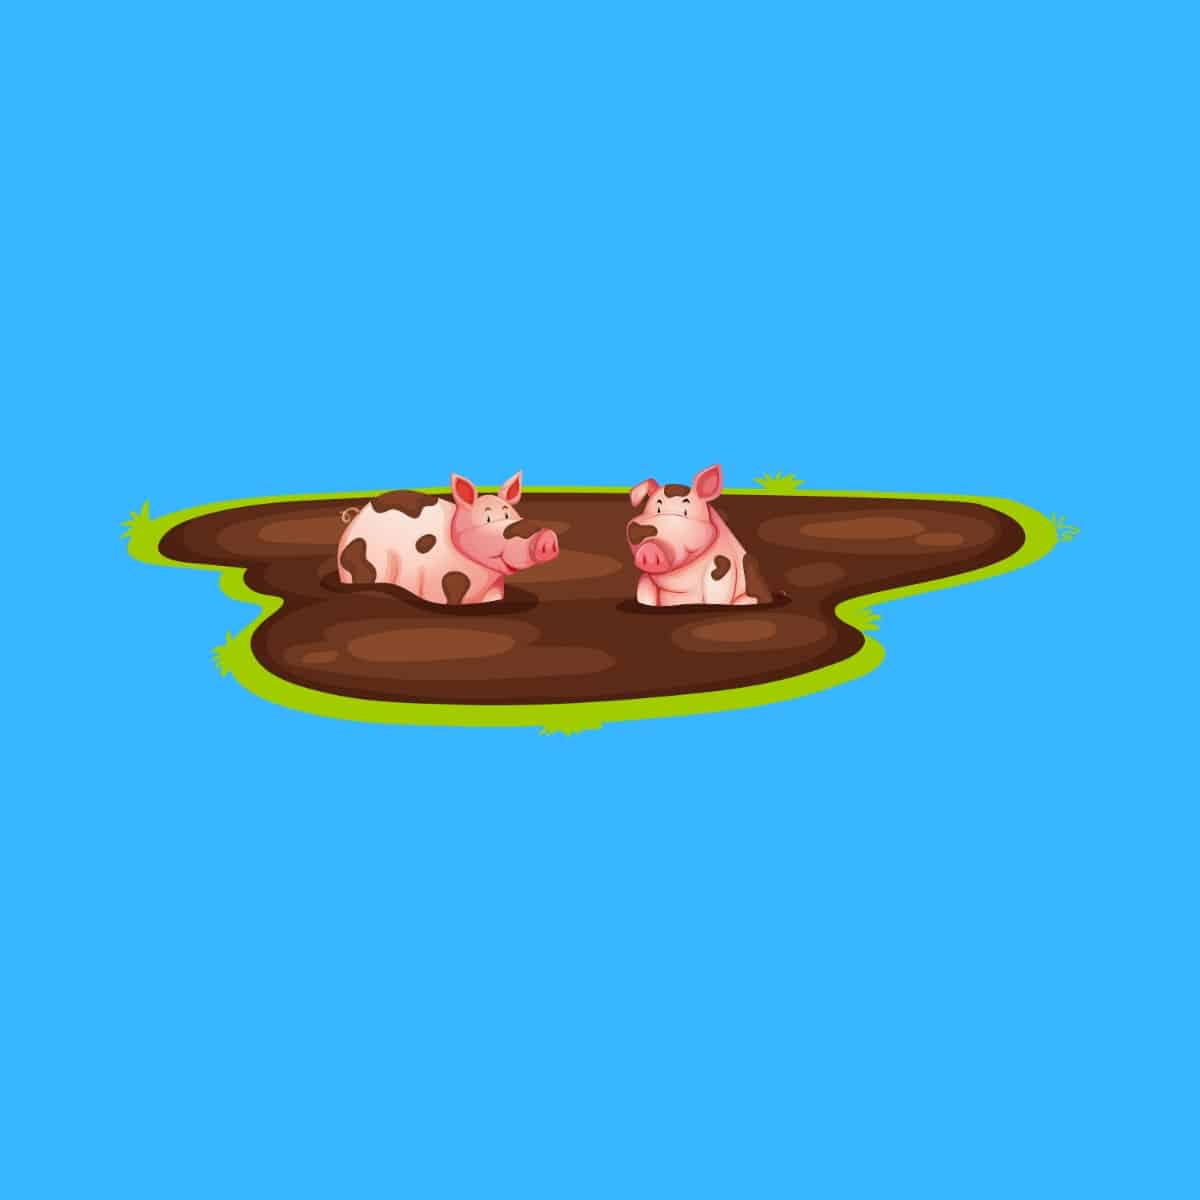 Cartoon graphic of two pigs in a mud pit on a blue background.